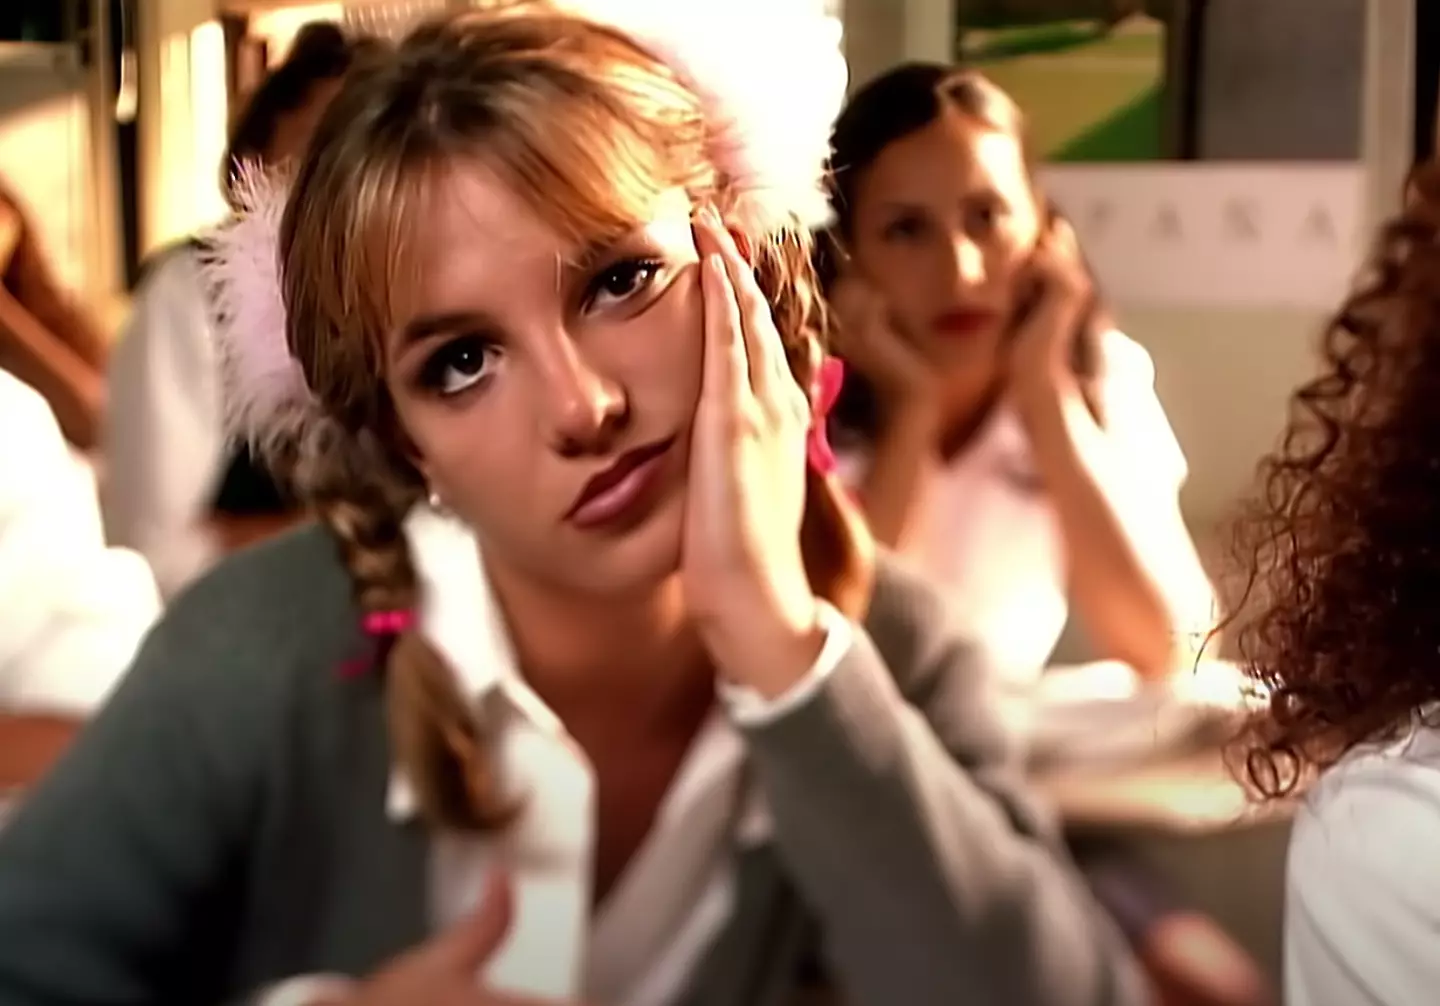 Did you know Britney Spears' 'Stronger' and 'Baby One More Time' are related?